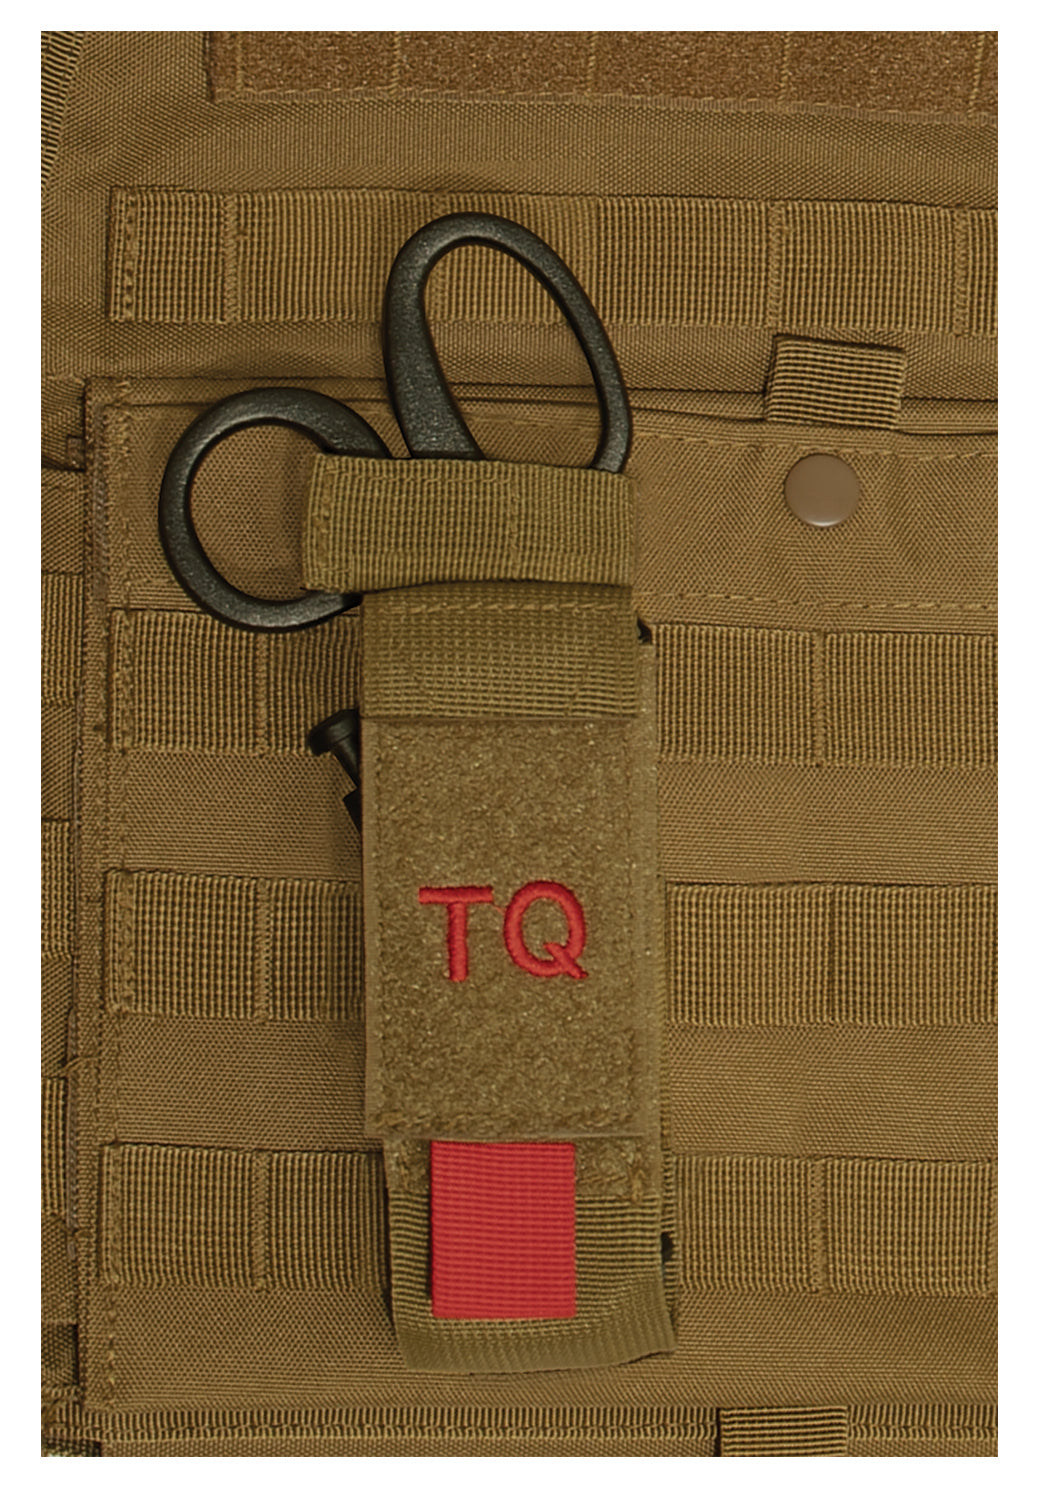 MOLLE Tactical Tourniquet and Shear Holder Pouch - Tactical Choice Plus